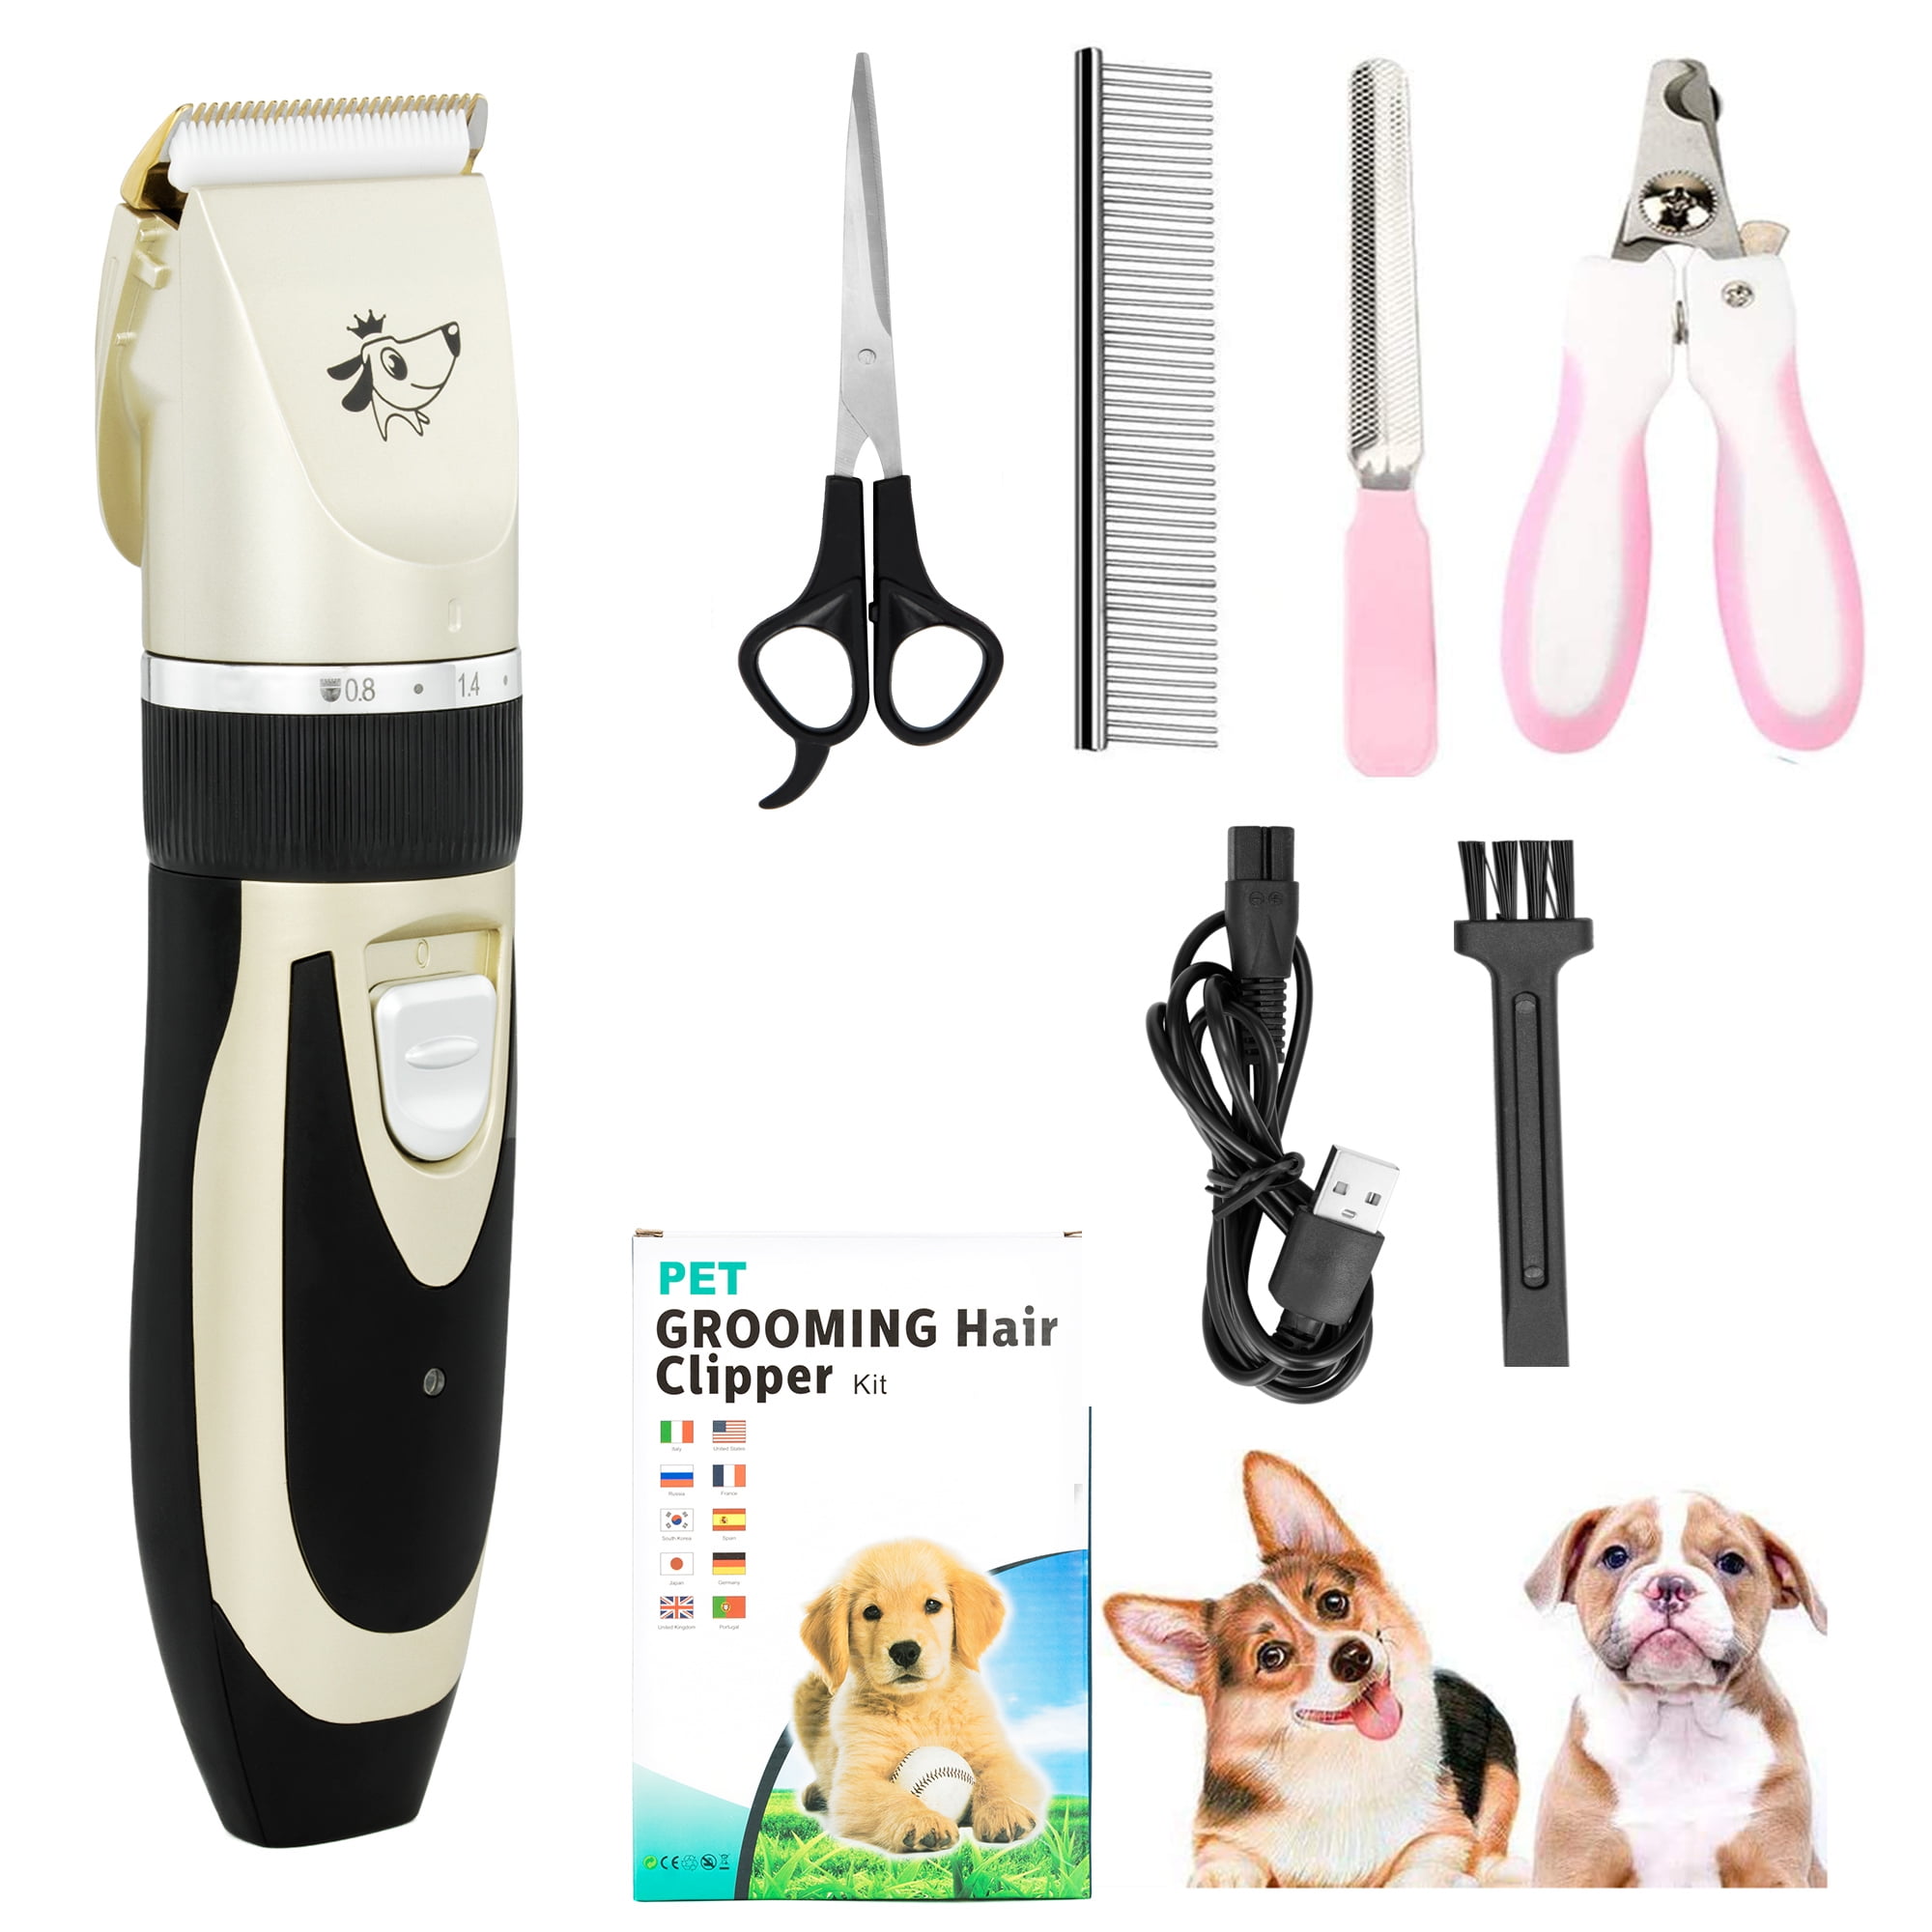 dog grooming clippers walmart